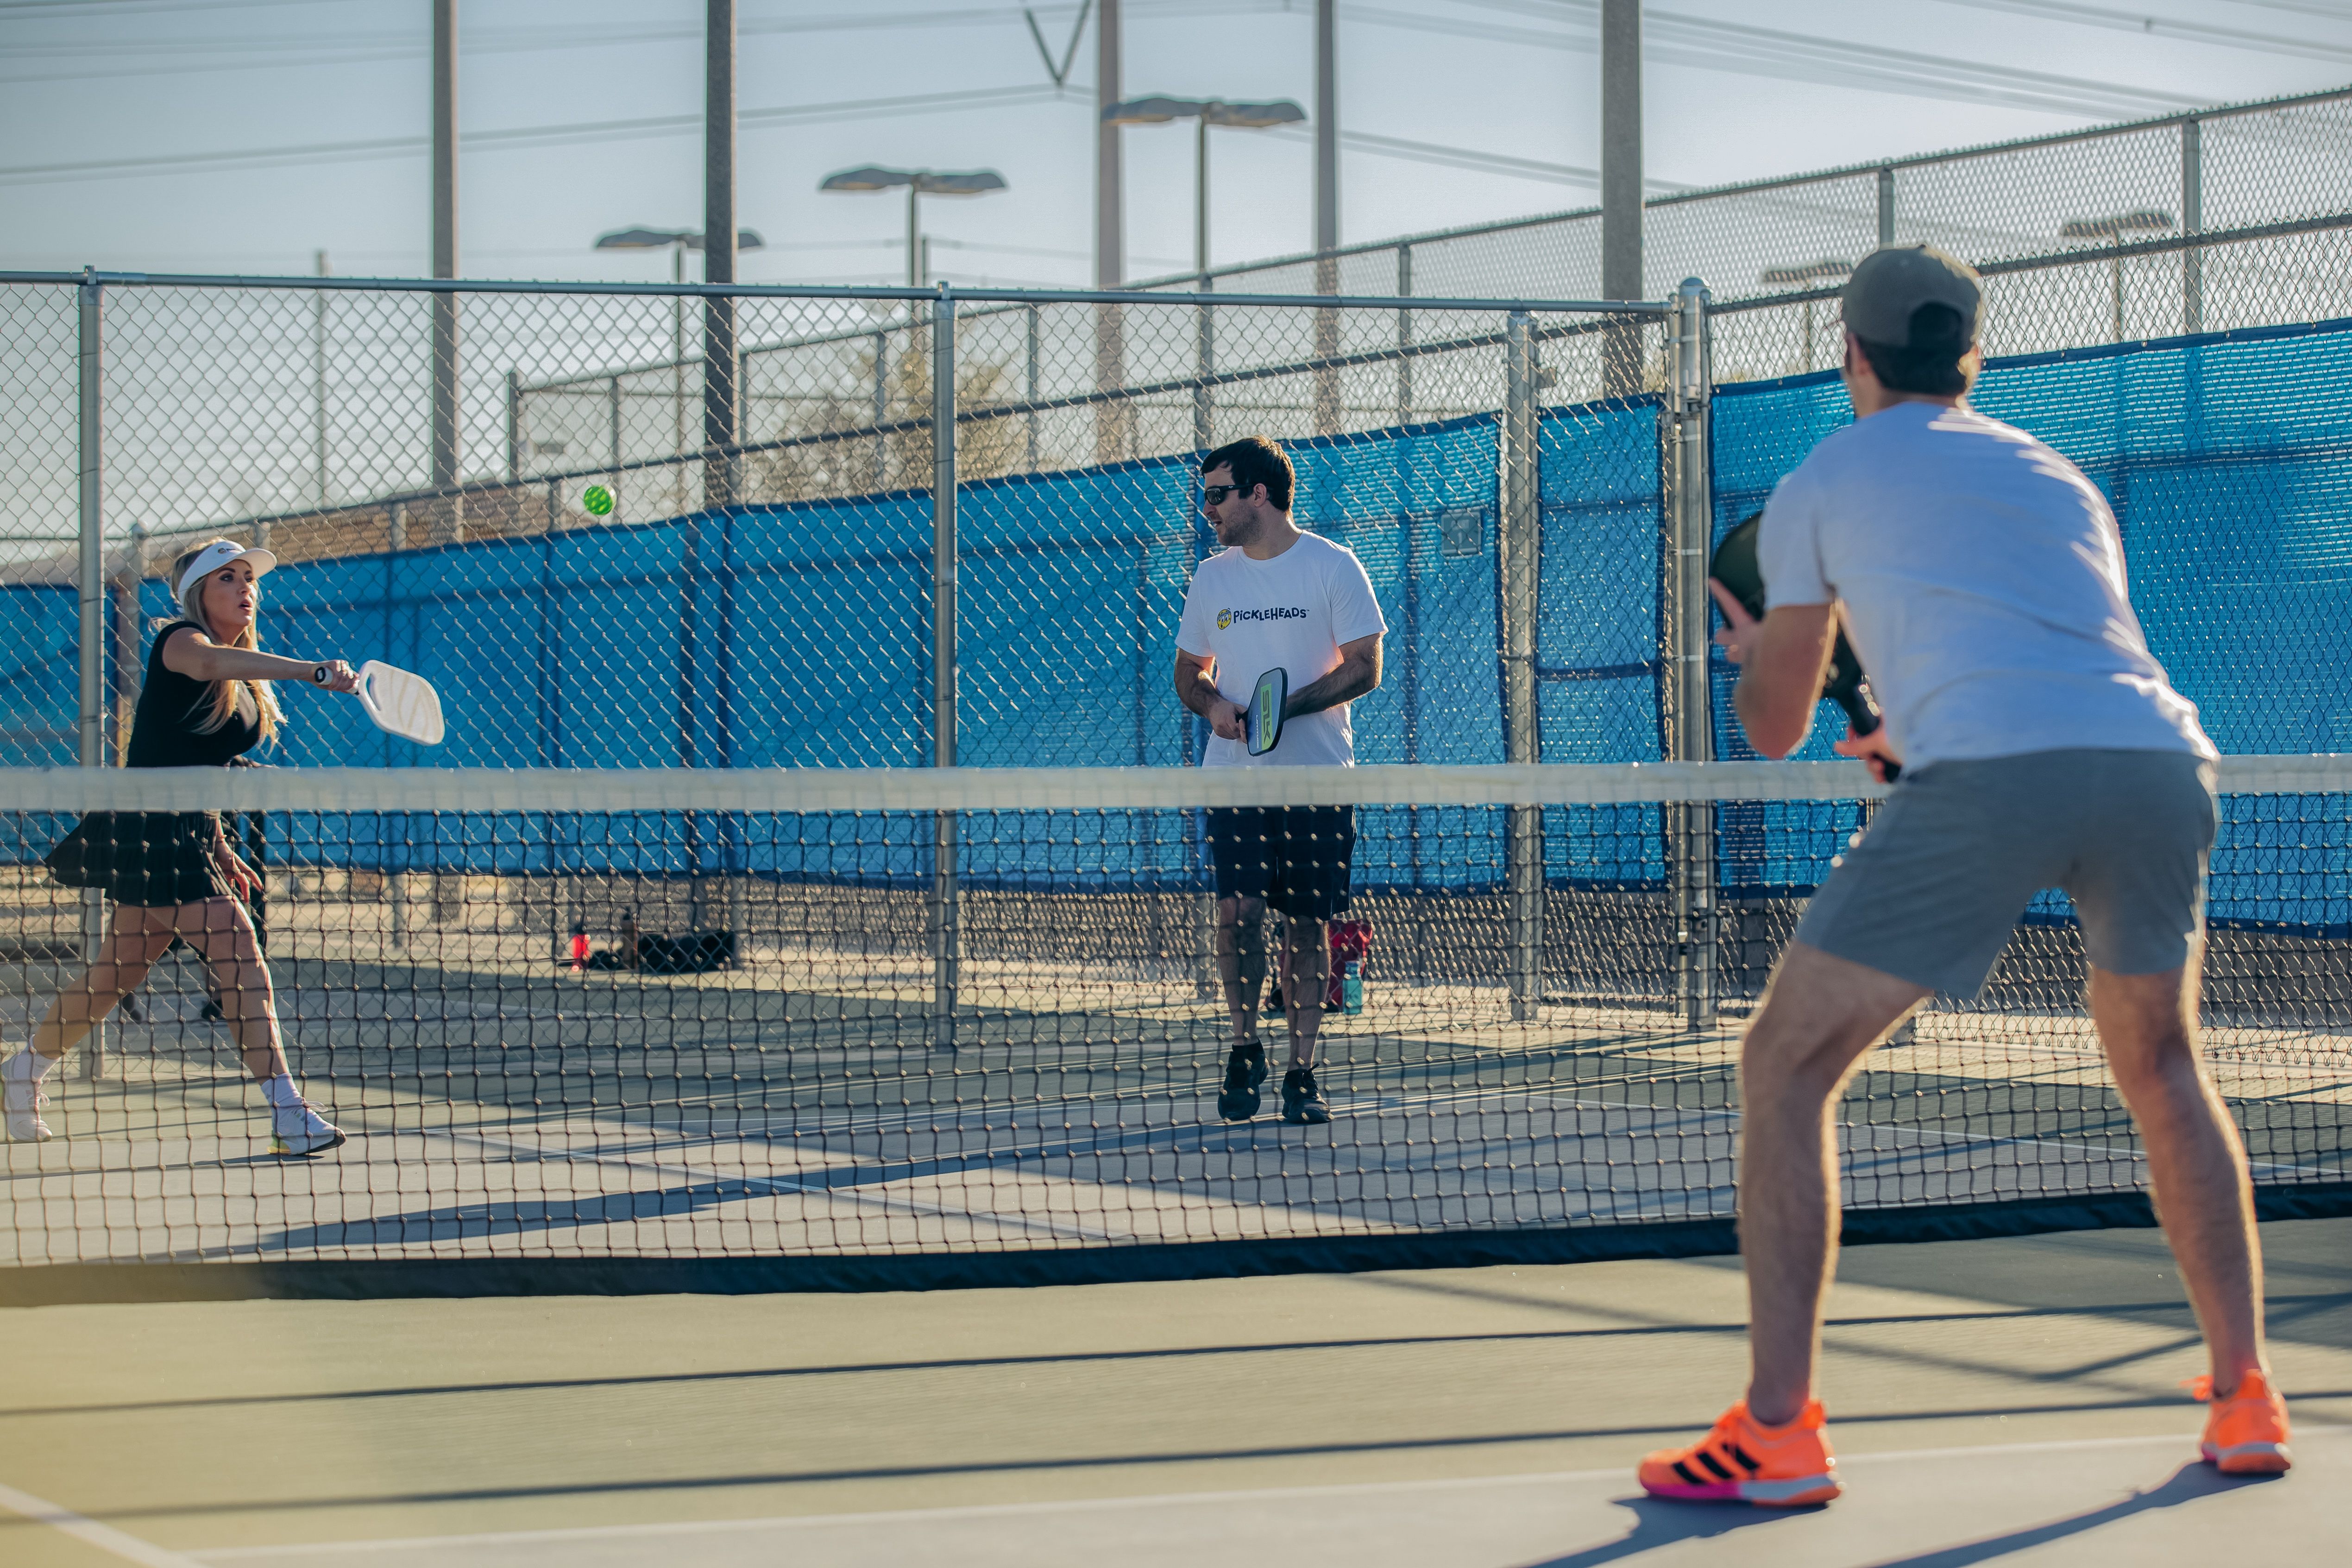 Players engaging in a game of doubles pickleball